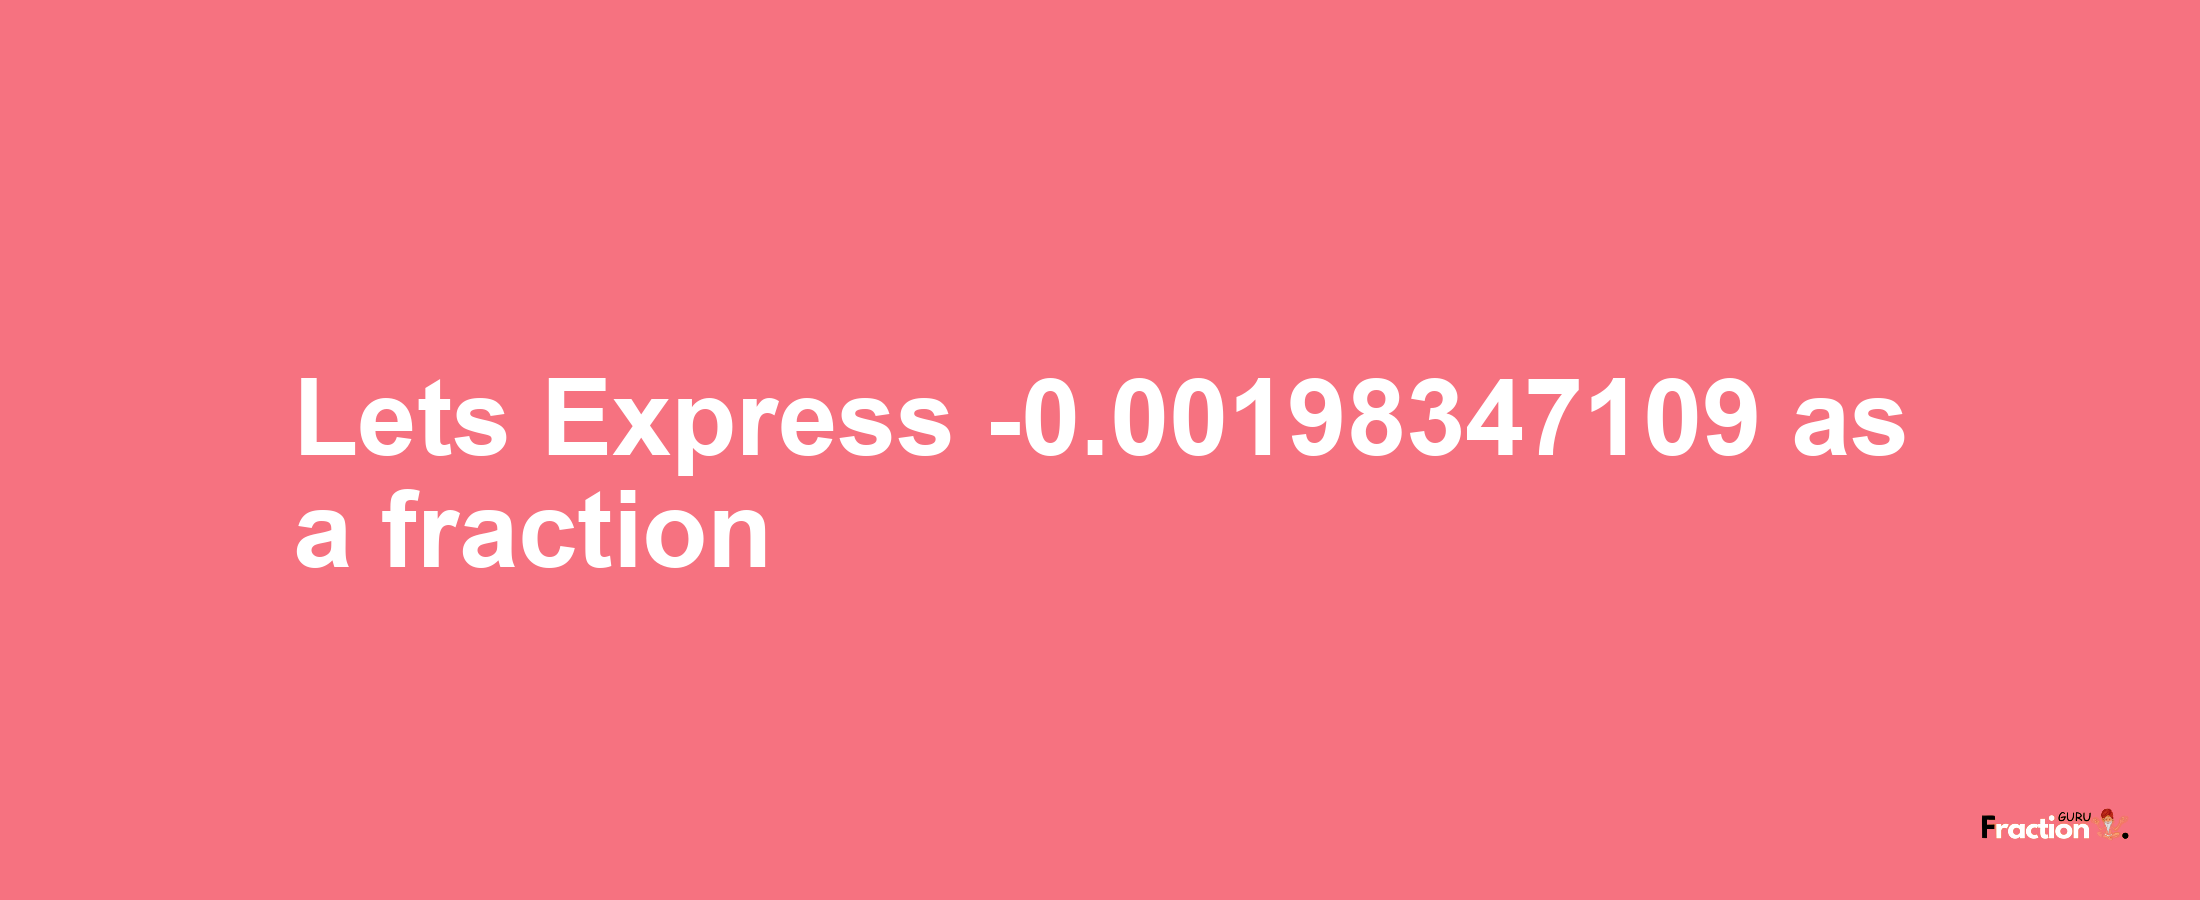 Lets Express -0.00198347109 as afraction